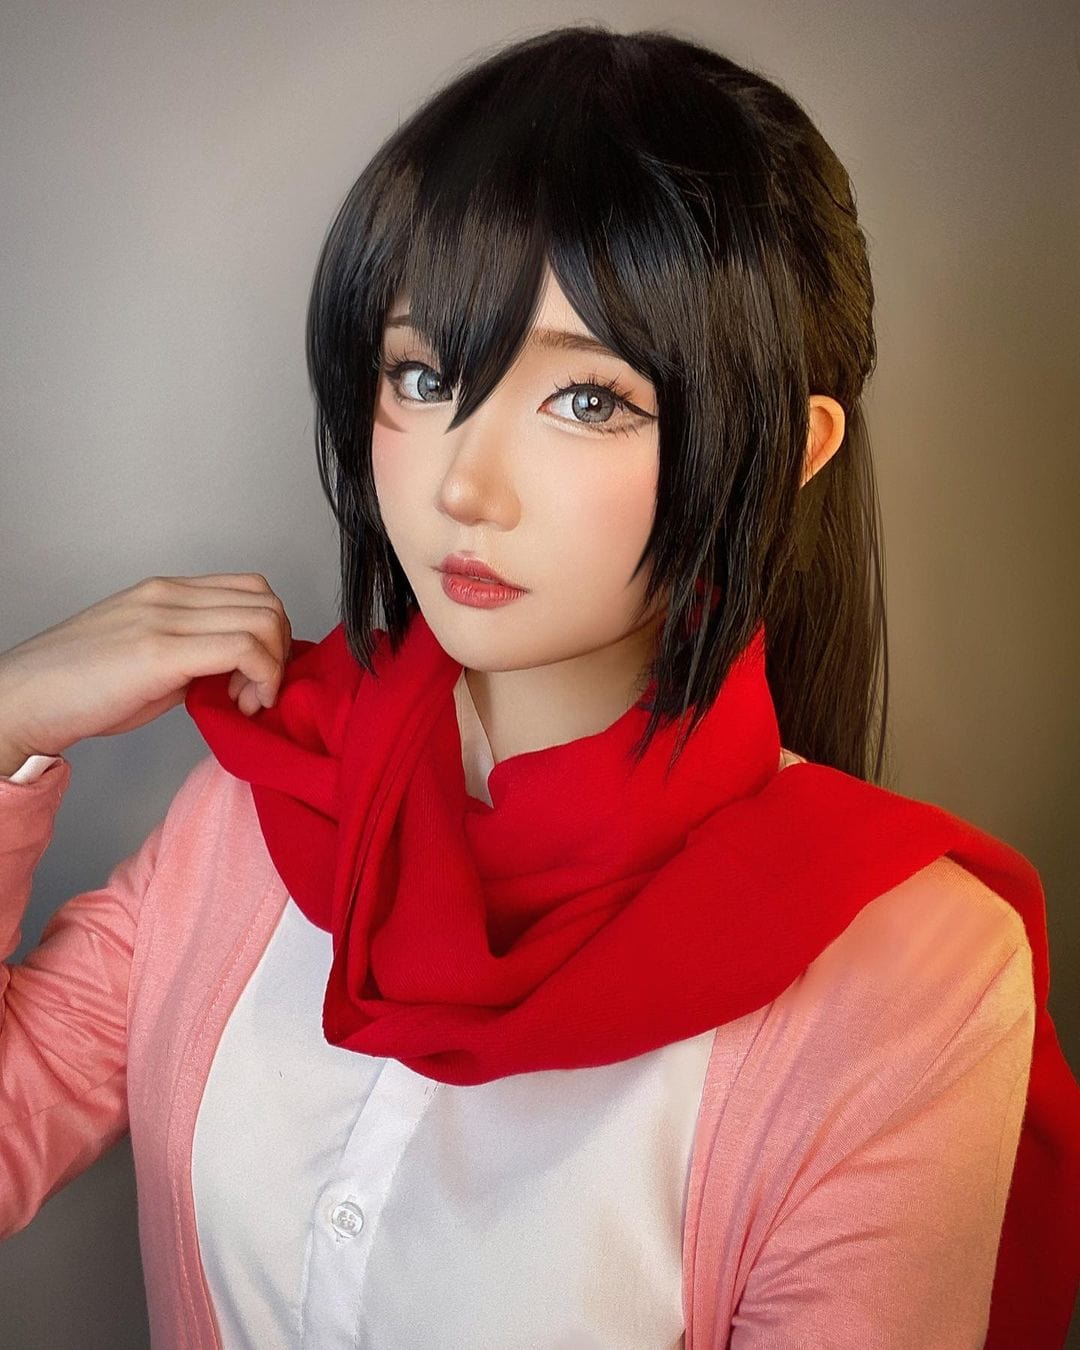 Mikasa Cosplay from Attack On Titan